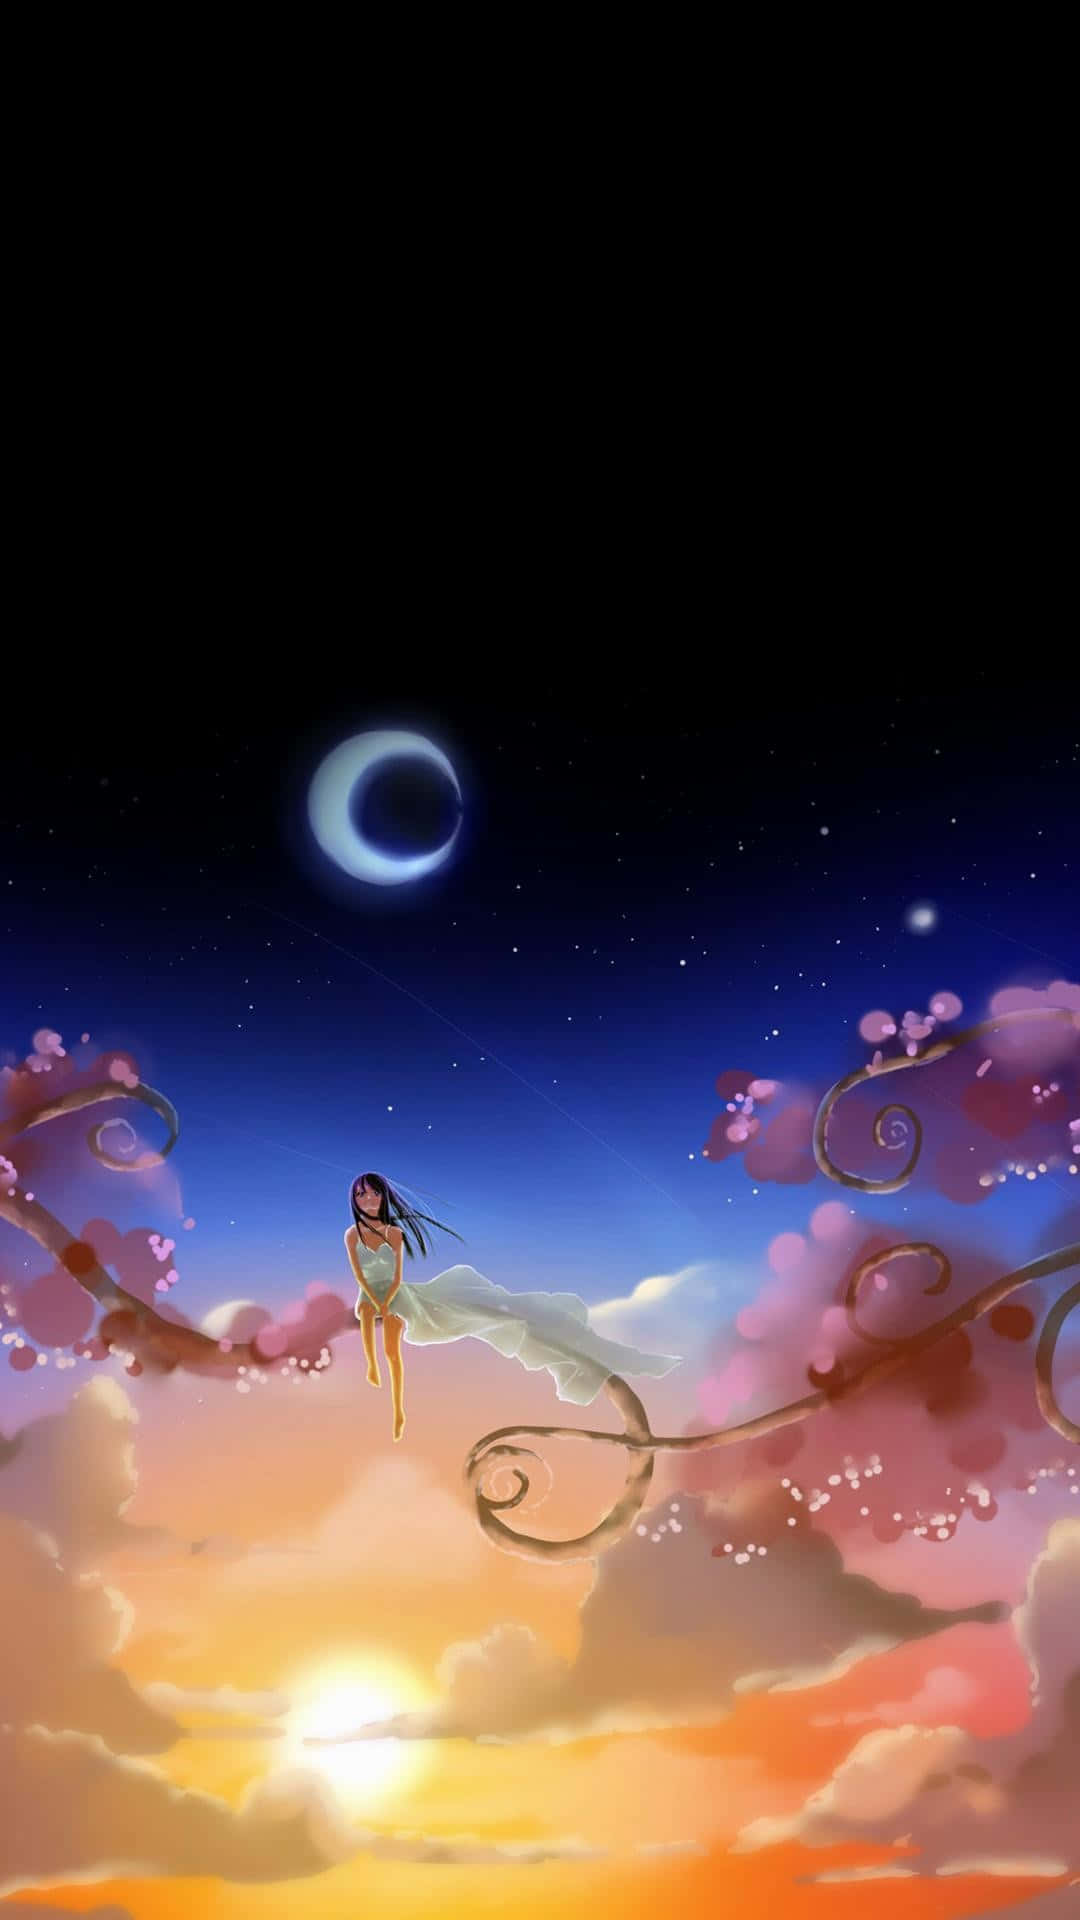 A Girl Is Flying Over The Moon And Clouds Wallpaper